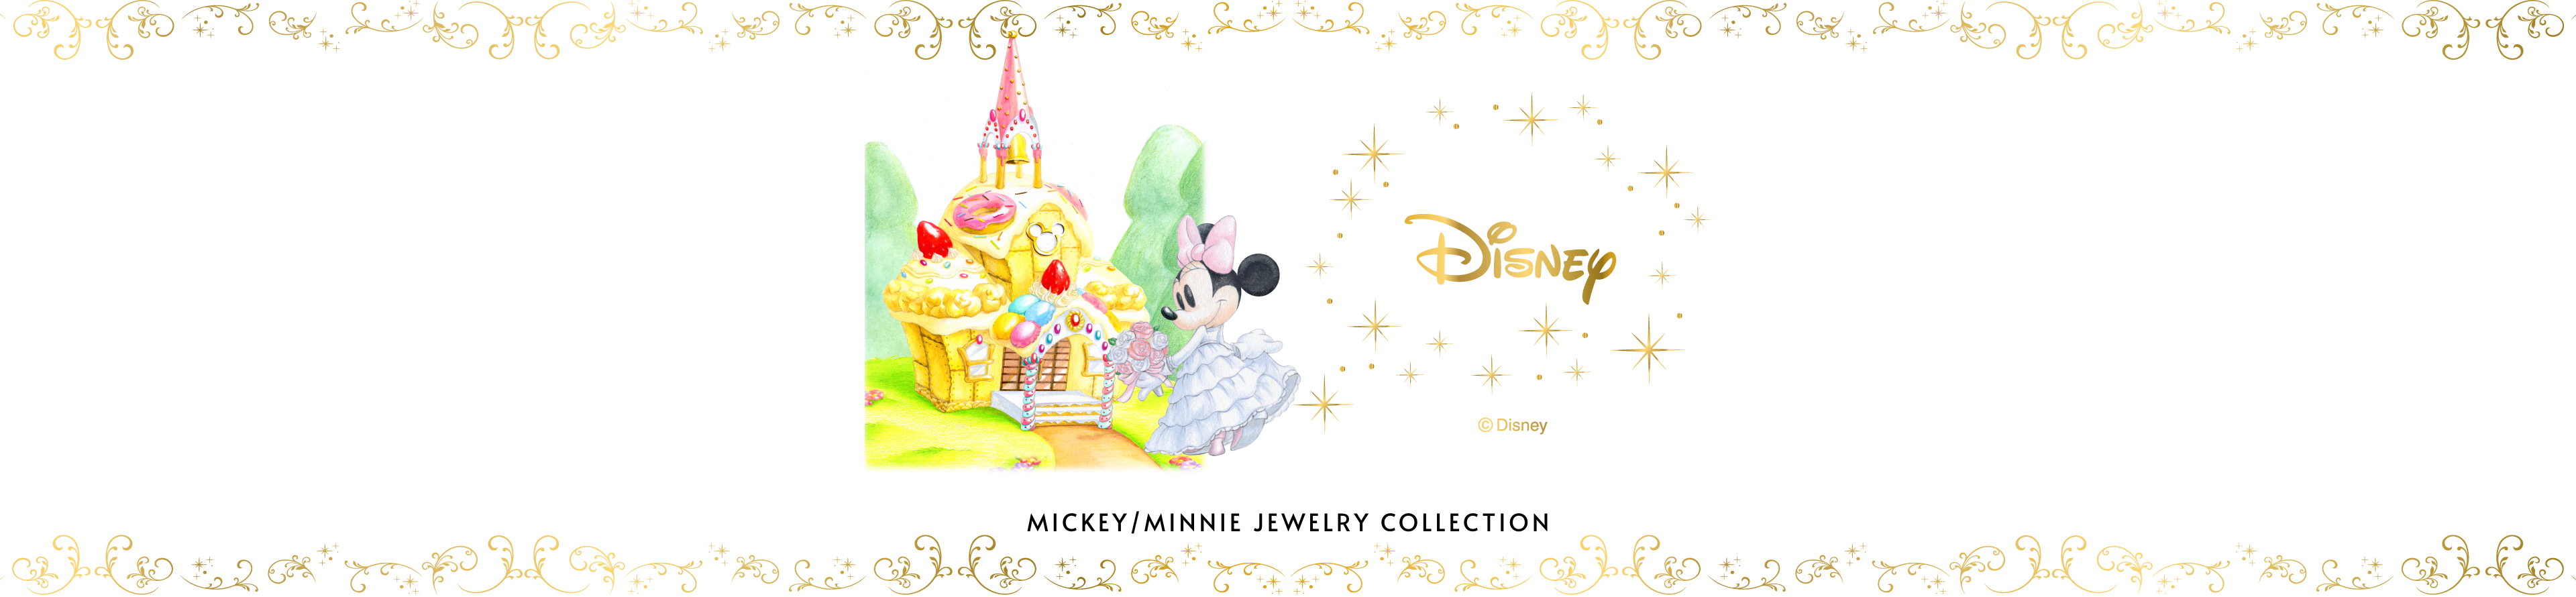 MICKEY MOUSE ミッキー＆ミニーコレクション　MICKEY & MINNIE COLLECTIONS